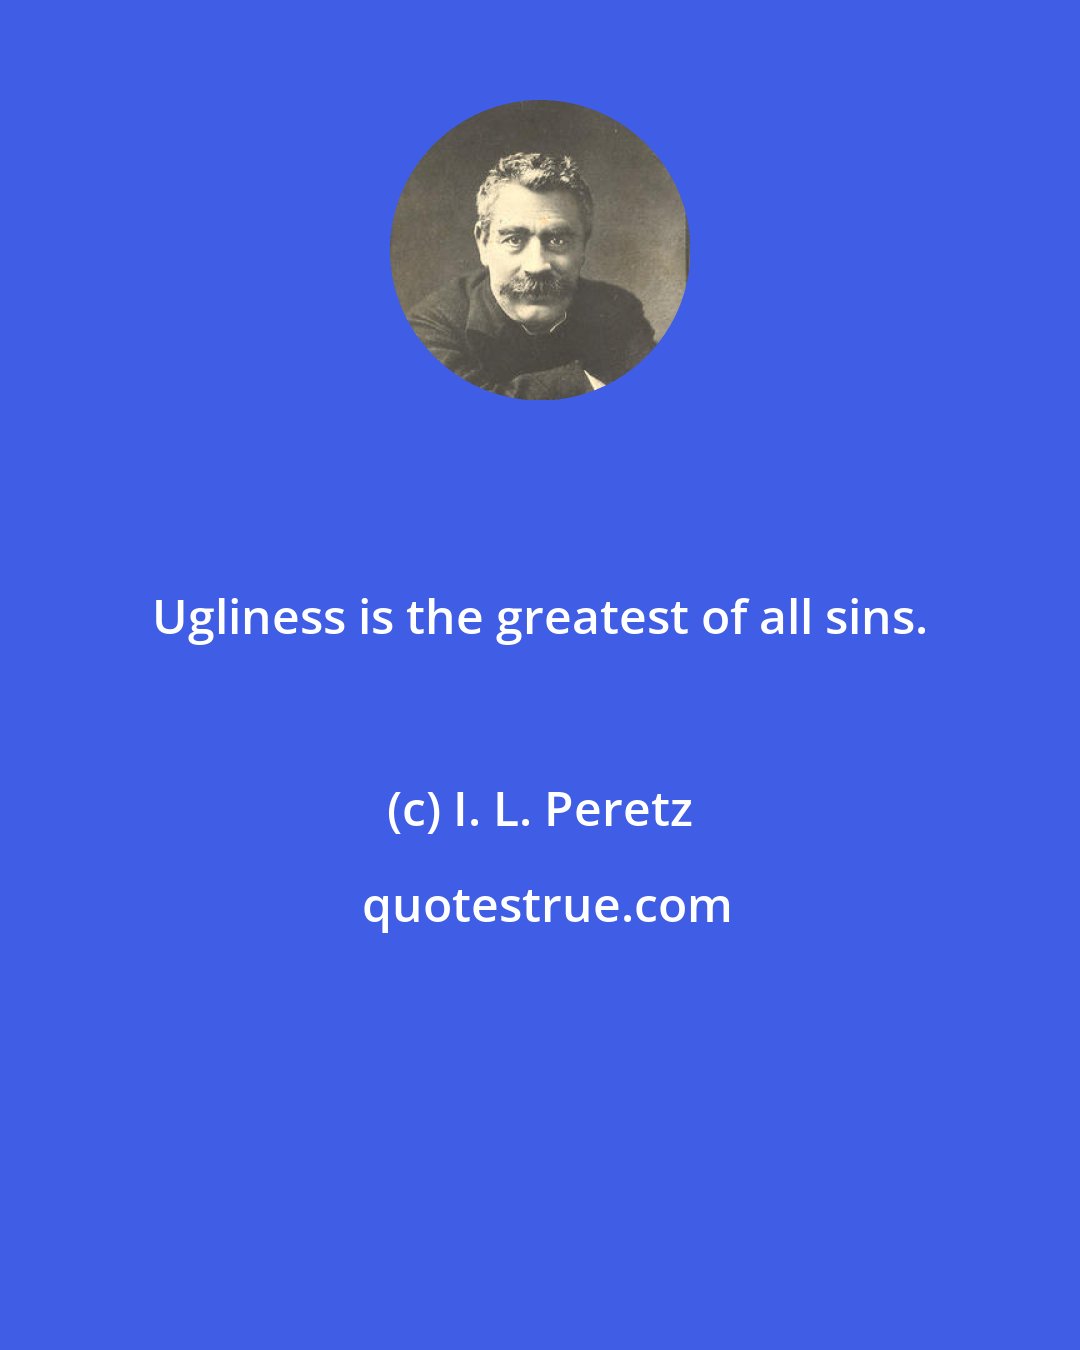 I. L. Peretz: Ugliness is the greatest of all sins.